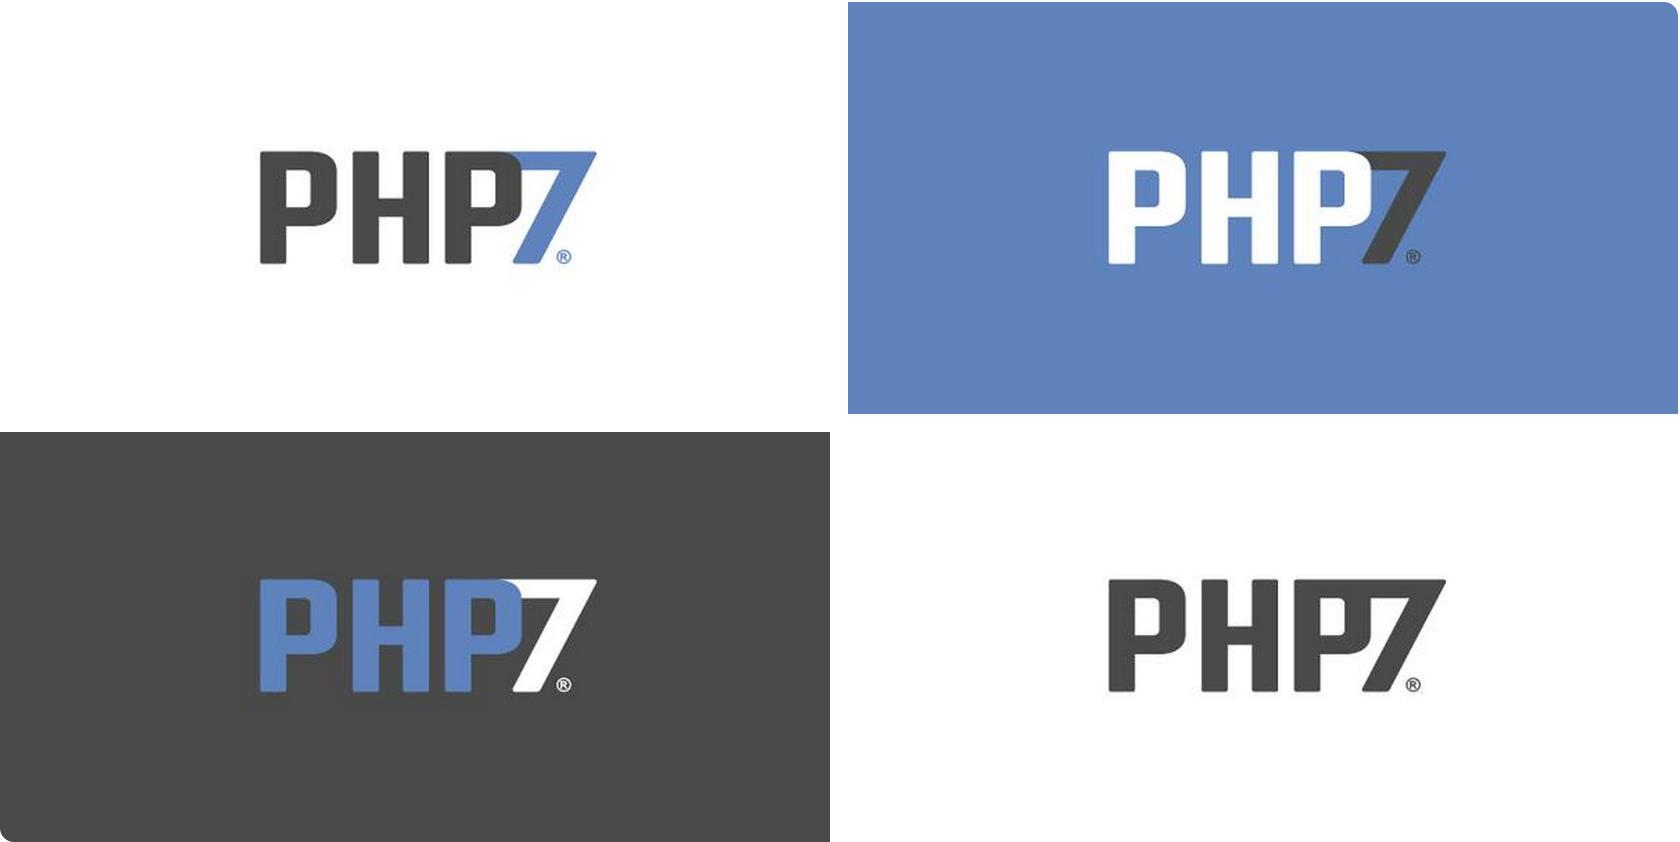 Php7 logo by Vincent Pontier